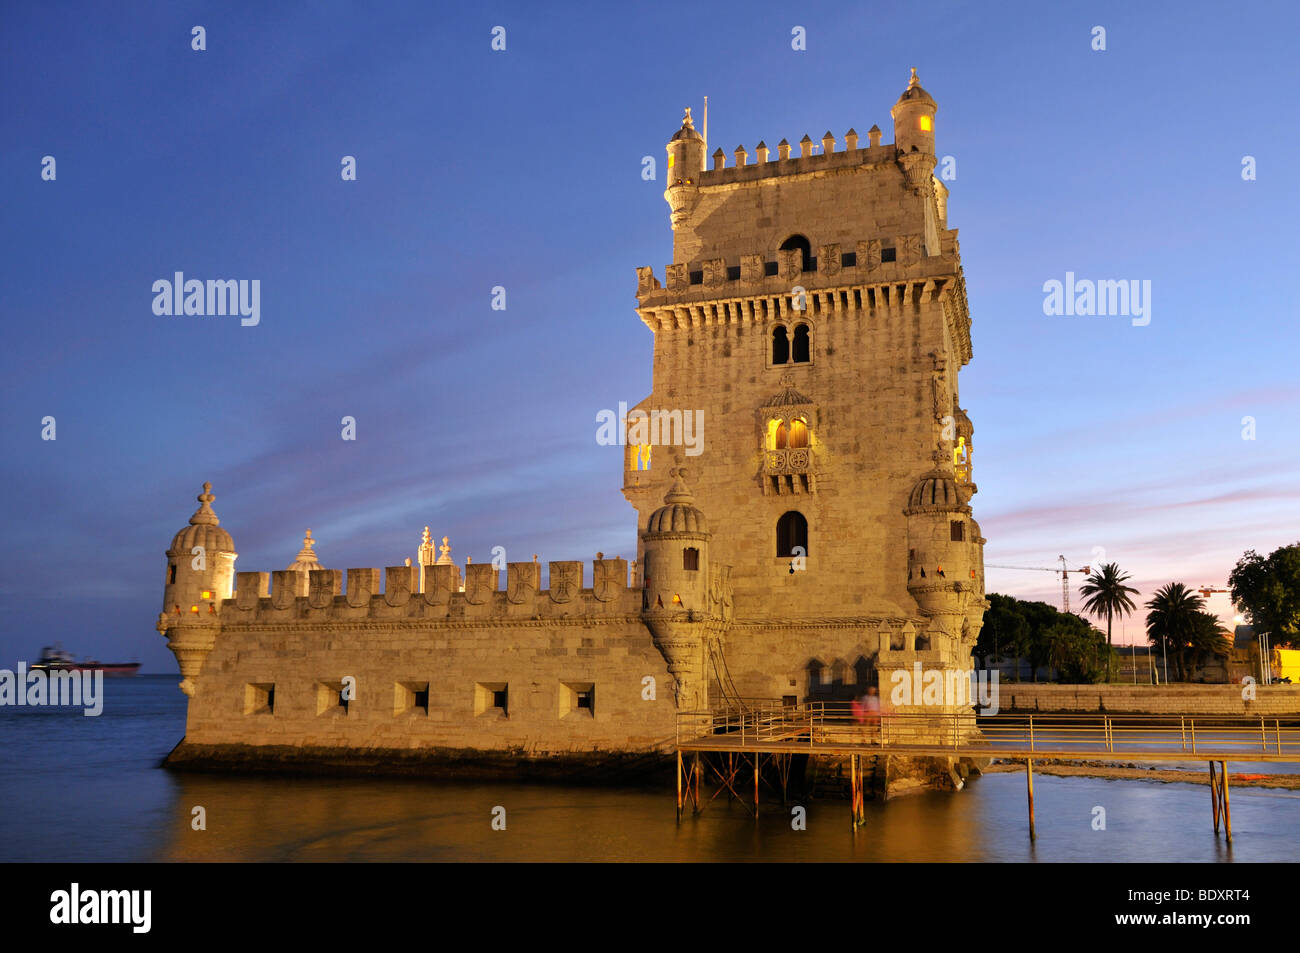 Torre de Belem, defensive fortification from the 16th century, UNESCO World Heritage Site, at the mouth of the Tagus River, Bel Stock Photo